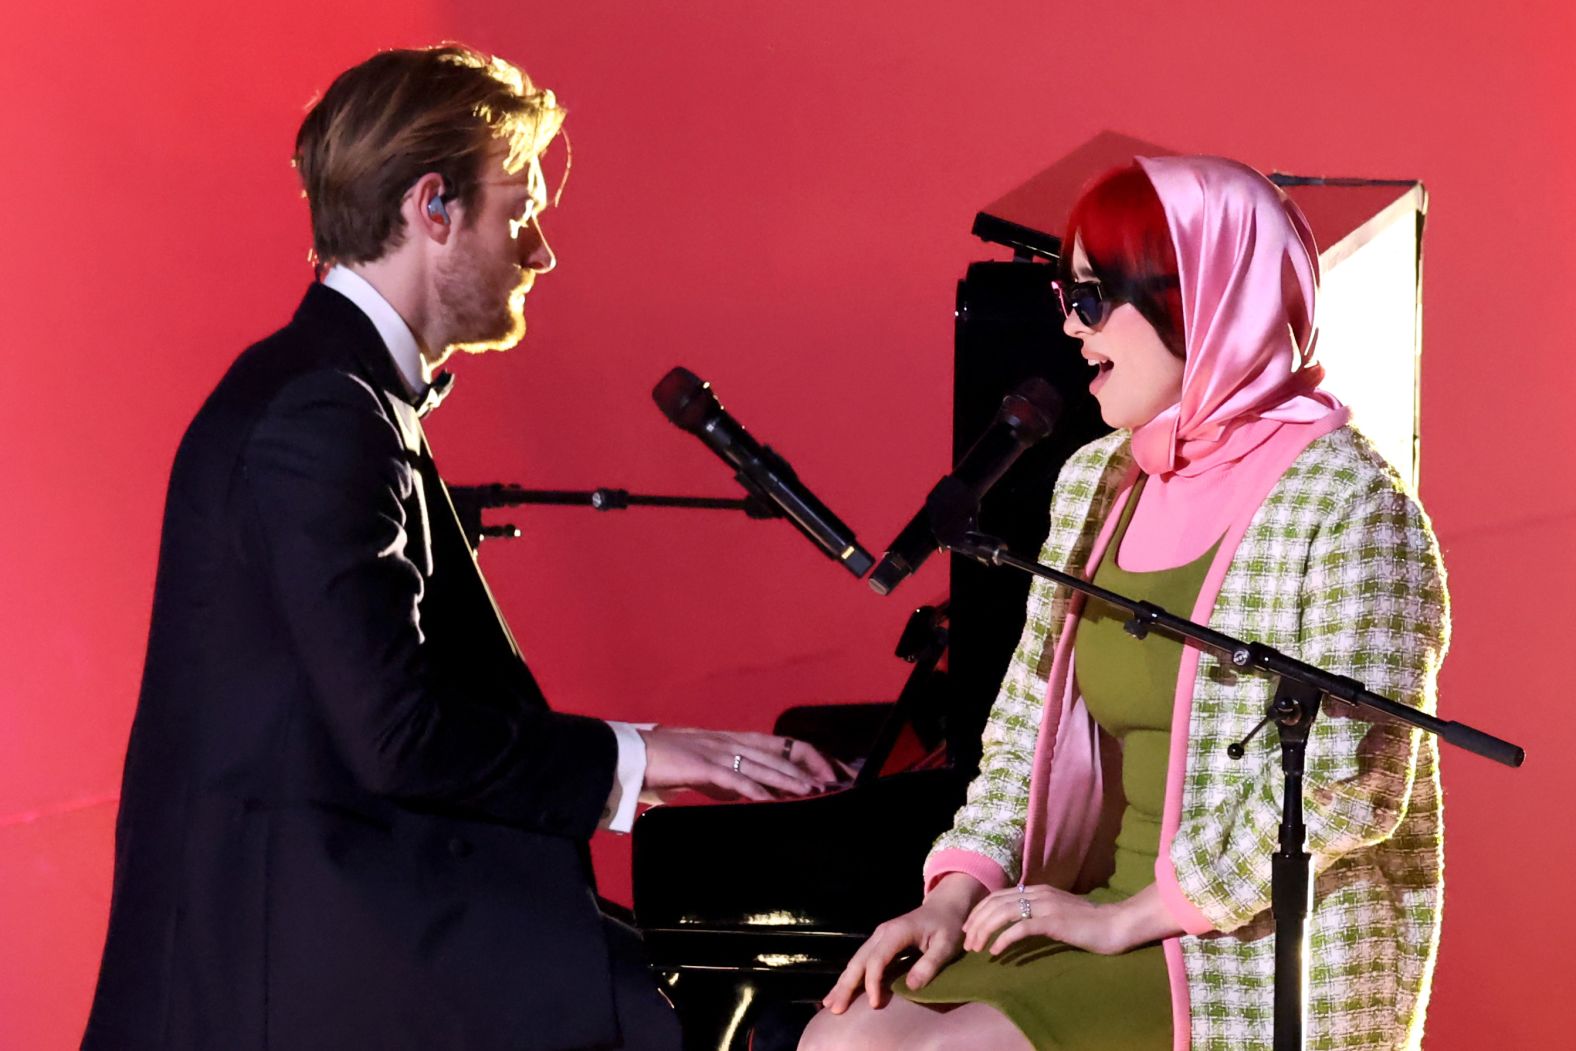 Eilish and Finneas perform "What Was I Made For?" The song, from the "Barbie" soundtrack, later won the Grammy for song of the year.